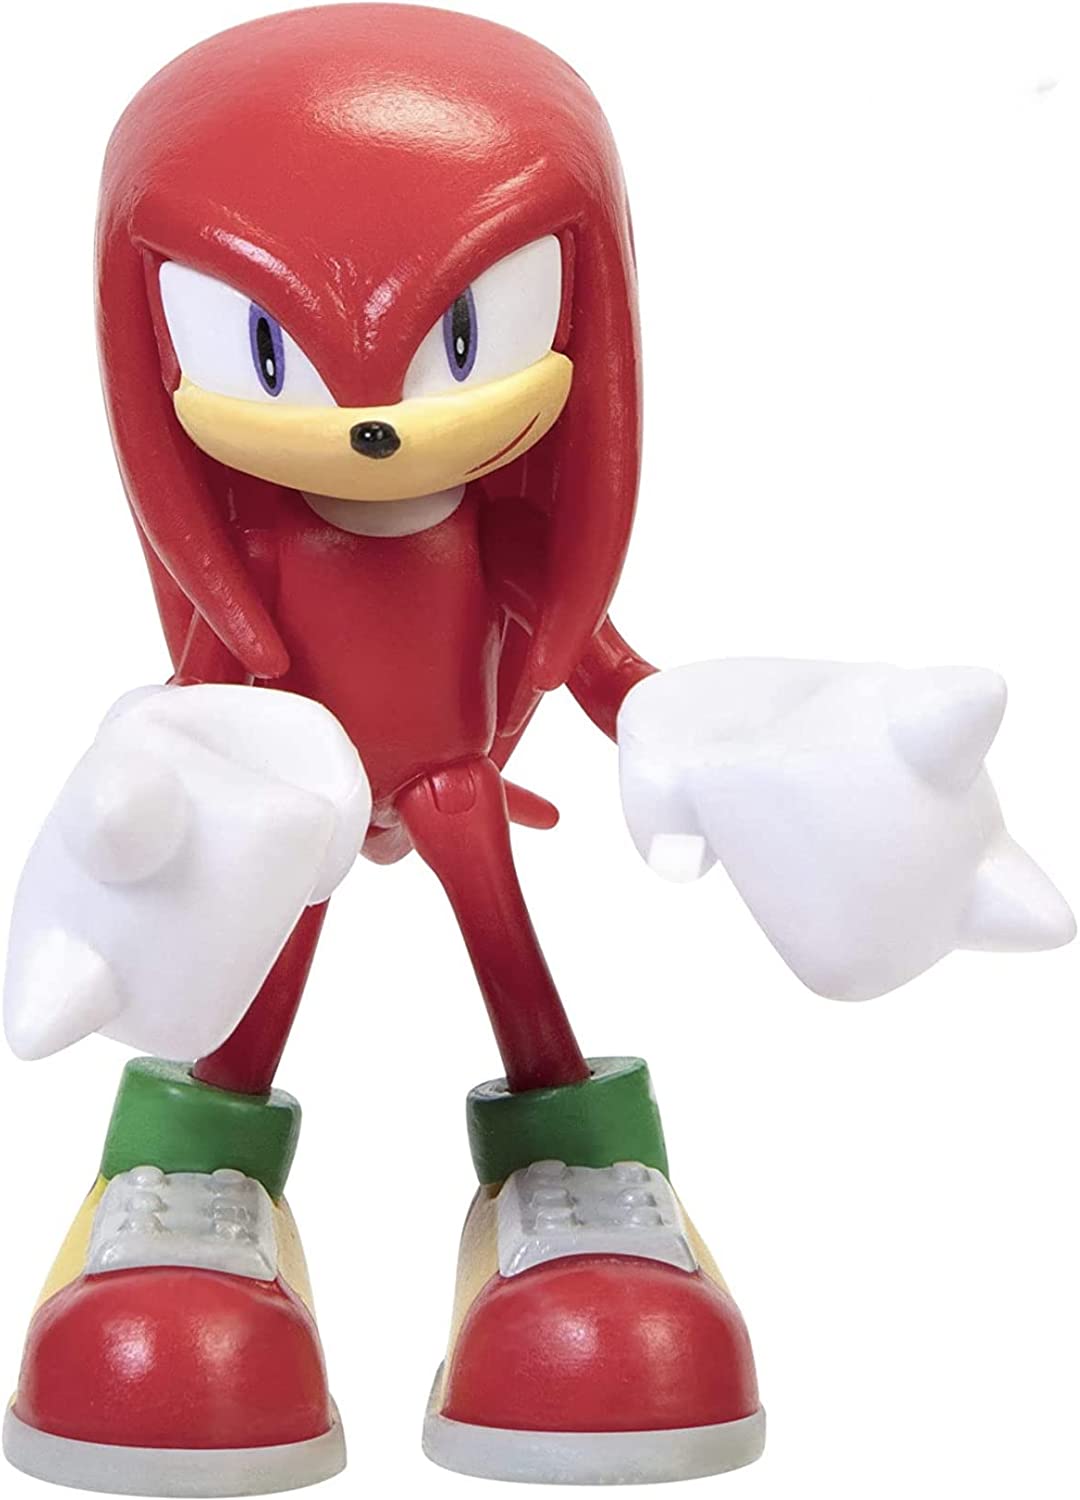 Sonic The Hedgehog 2 Inch Figurine - Knuckles